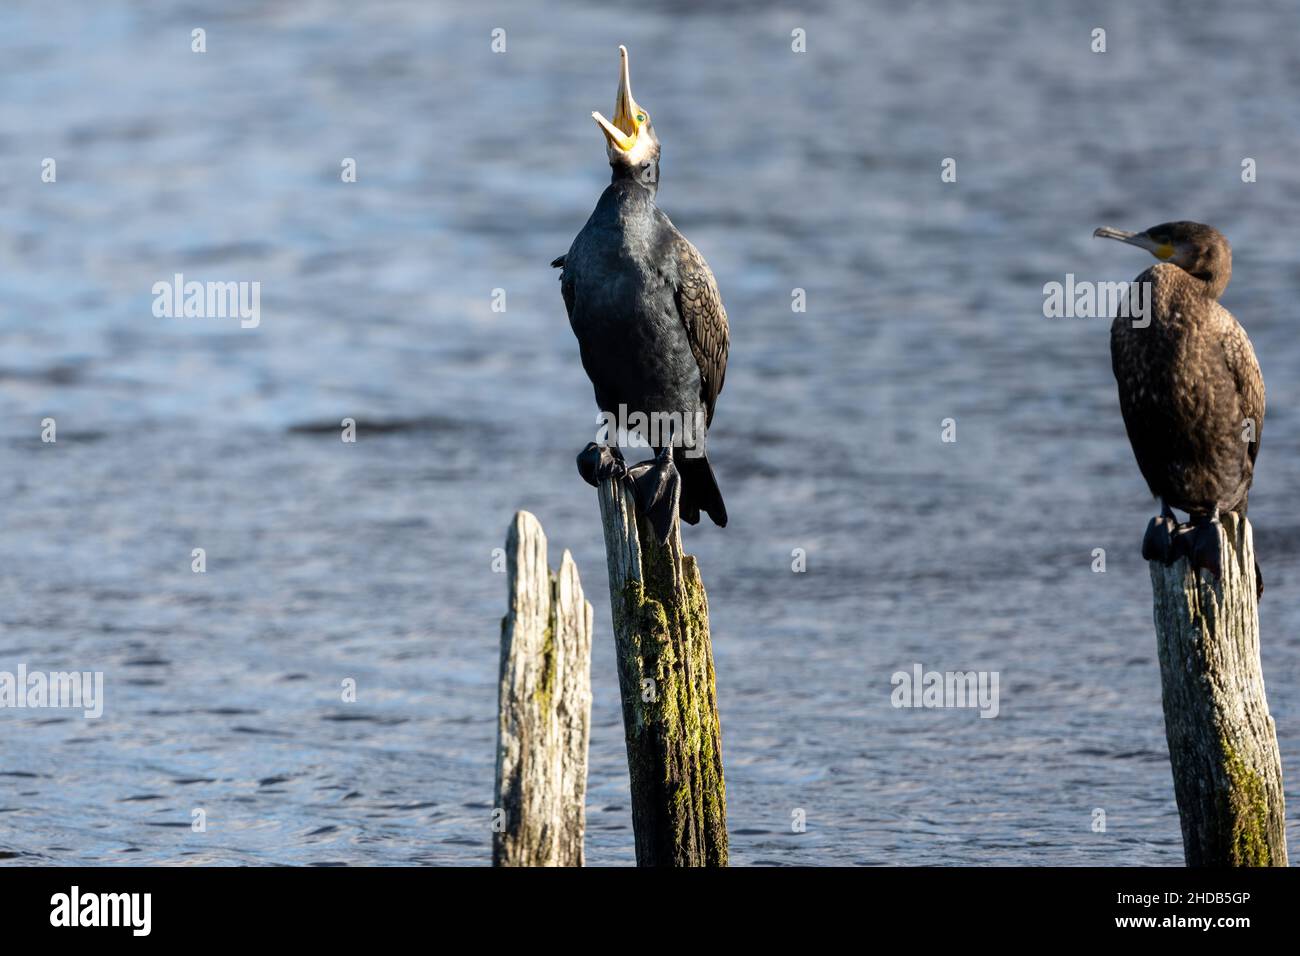 Squawk. A pair of Cormorants, Phalacrocorax carbo, sitting on poles in a lake in the New Forest, Hampshire, UK Stock Photo